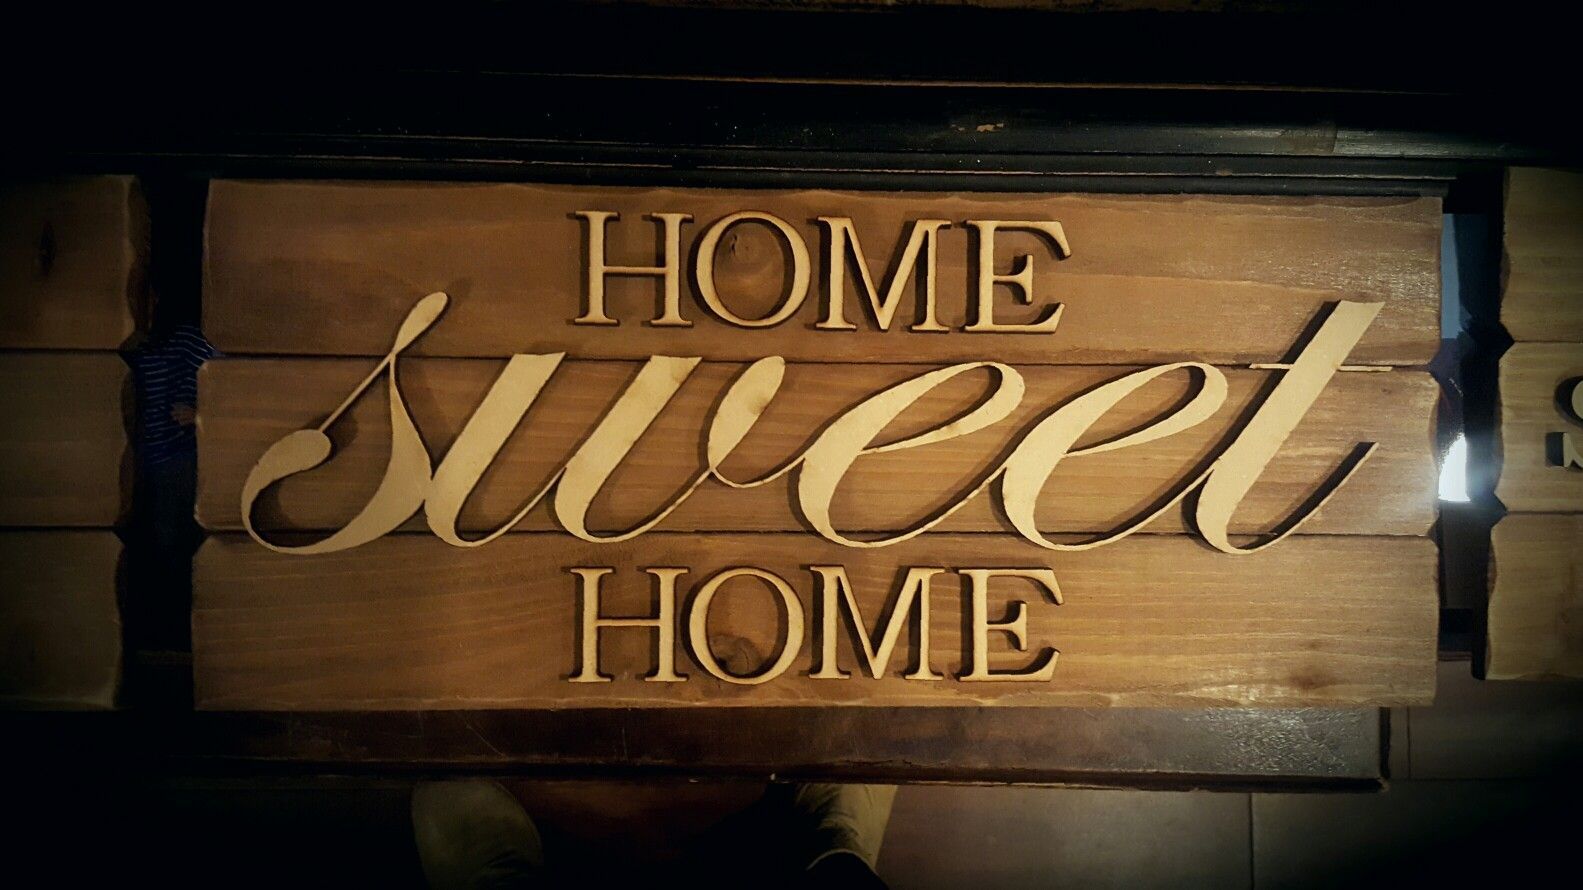 Home Sweet Home, Wall Art, New Home, Wall Decor, Wood Sign Regarding Laser Engraved Home Sweet Home Wall Decor (View 11 of 30)